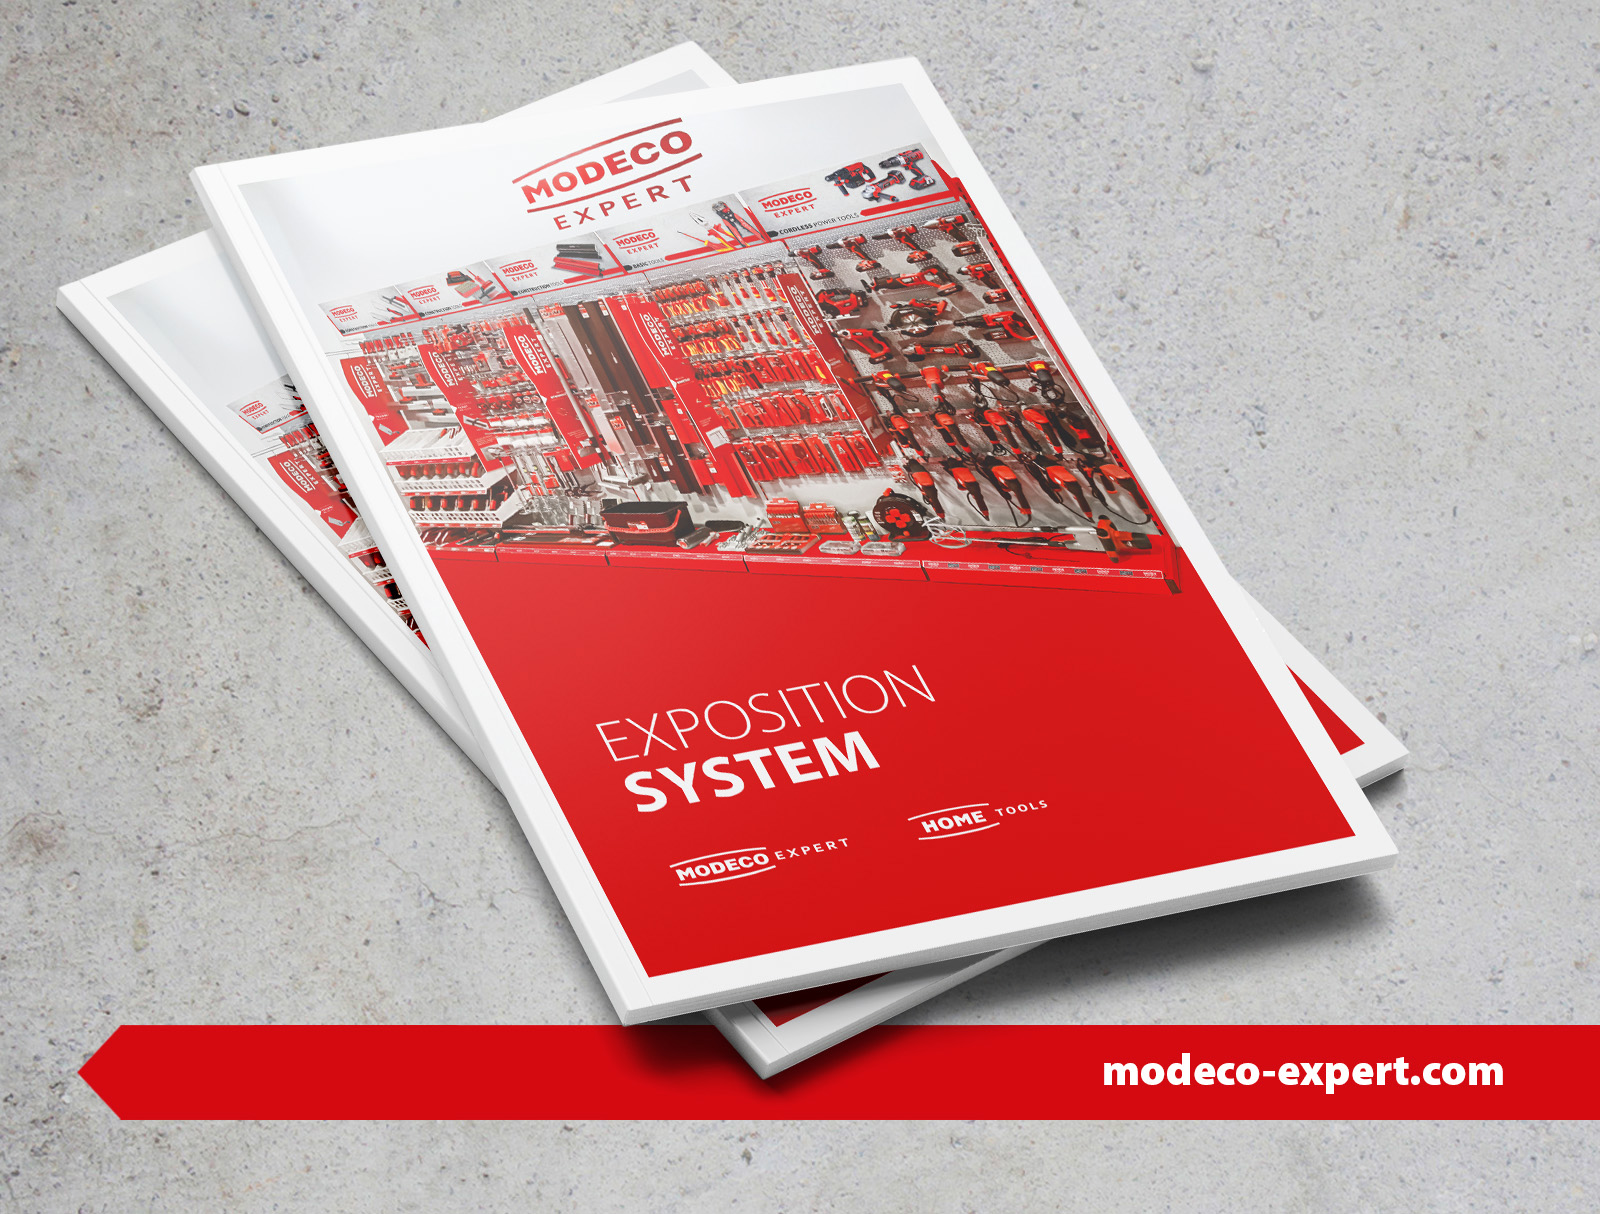 New POS catalog for Modeco Expert and Home Tools – now available!